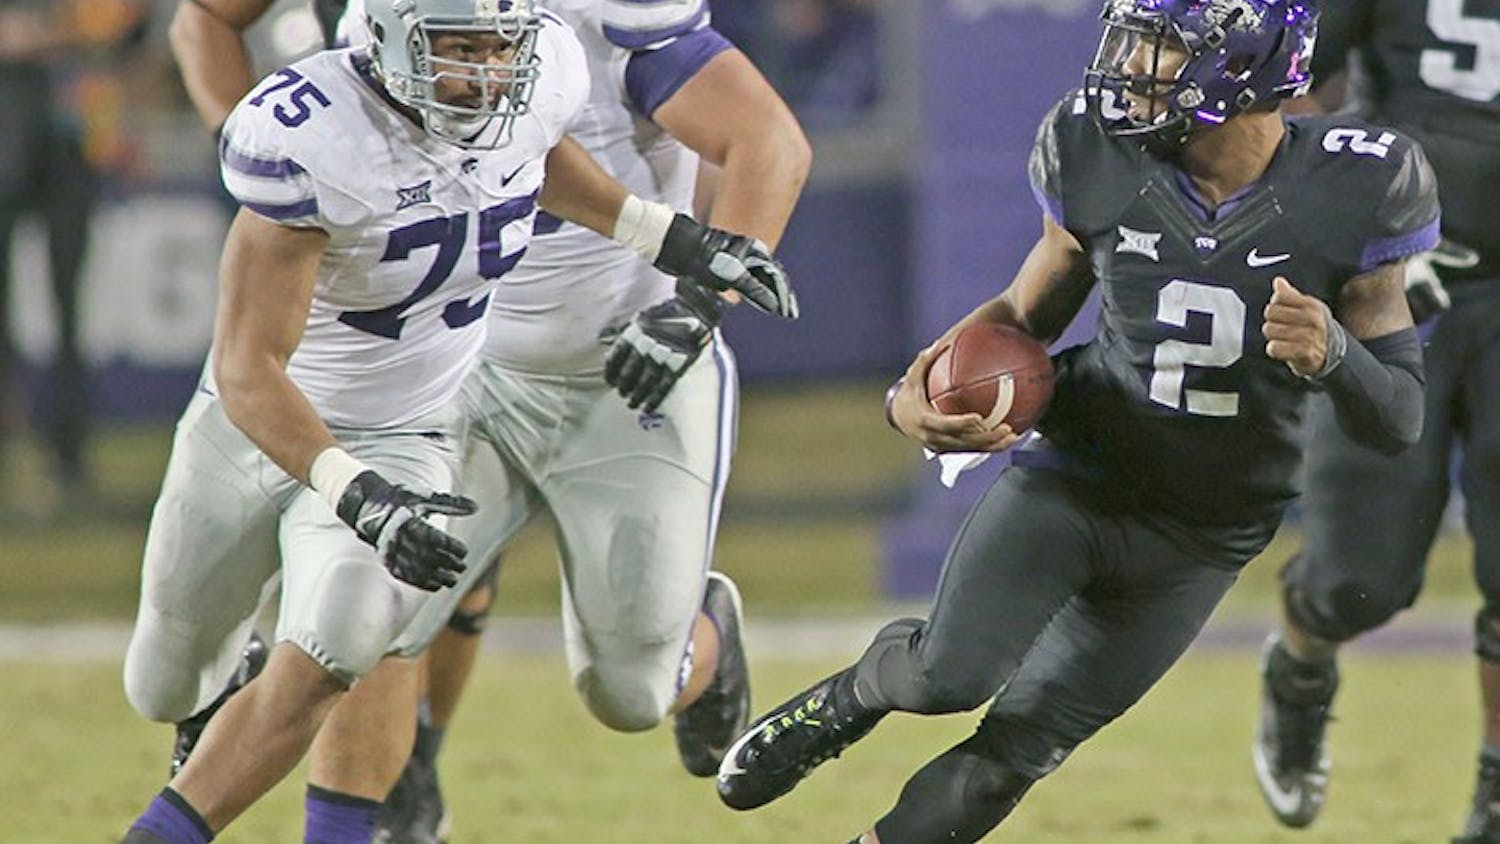 Texas Christian quarterback Trevone Boykin (2) scrambles away from Kansas State&apos;s Jordan Willis (75) for a first down the first quarter against Kansas State at Amon Carter Stadium in Fort Worth, Texas, on Saturday, Nov. 8, 2014. (Paul Moseley/Fort Worth Star-Telegram/MCT)